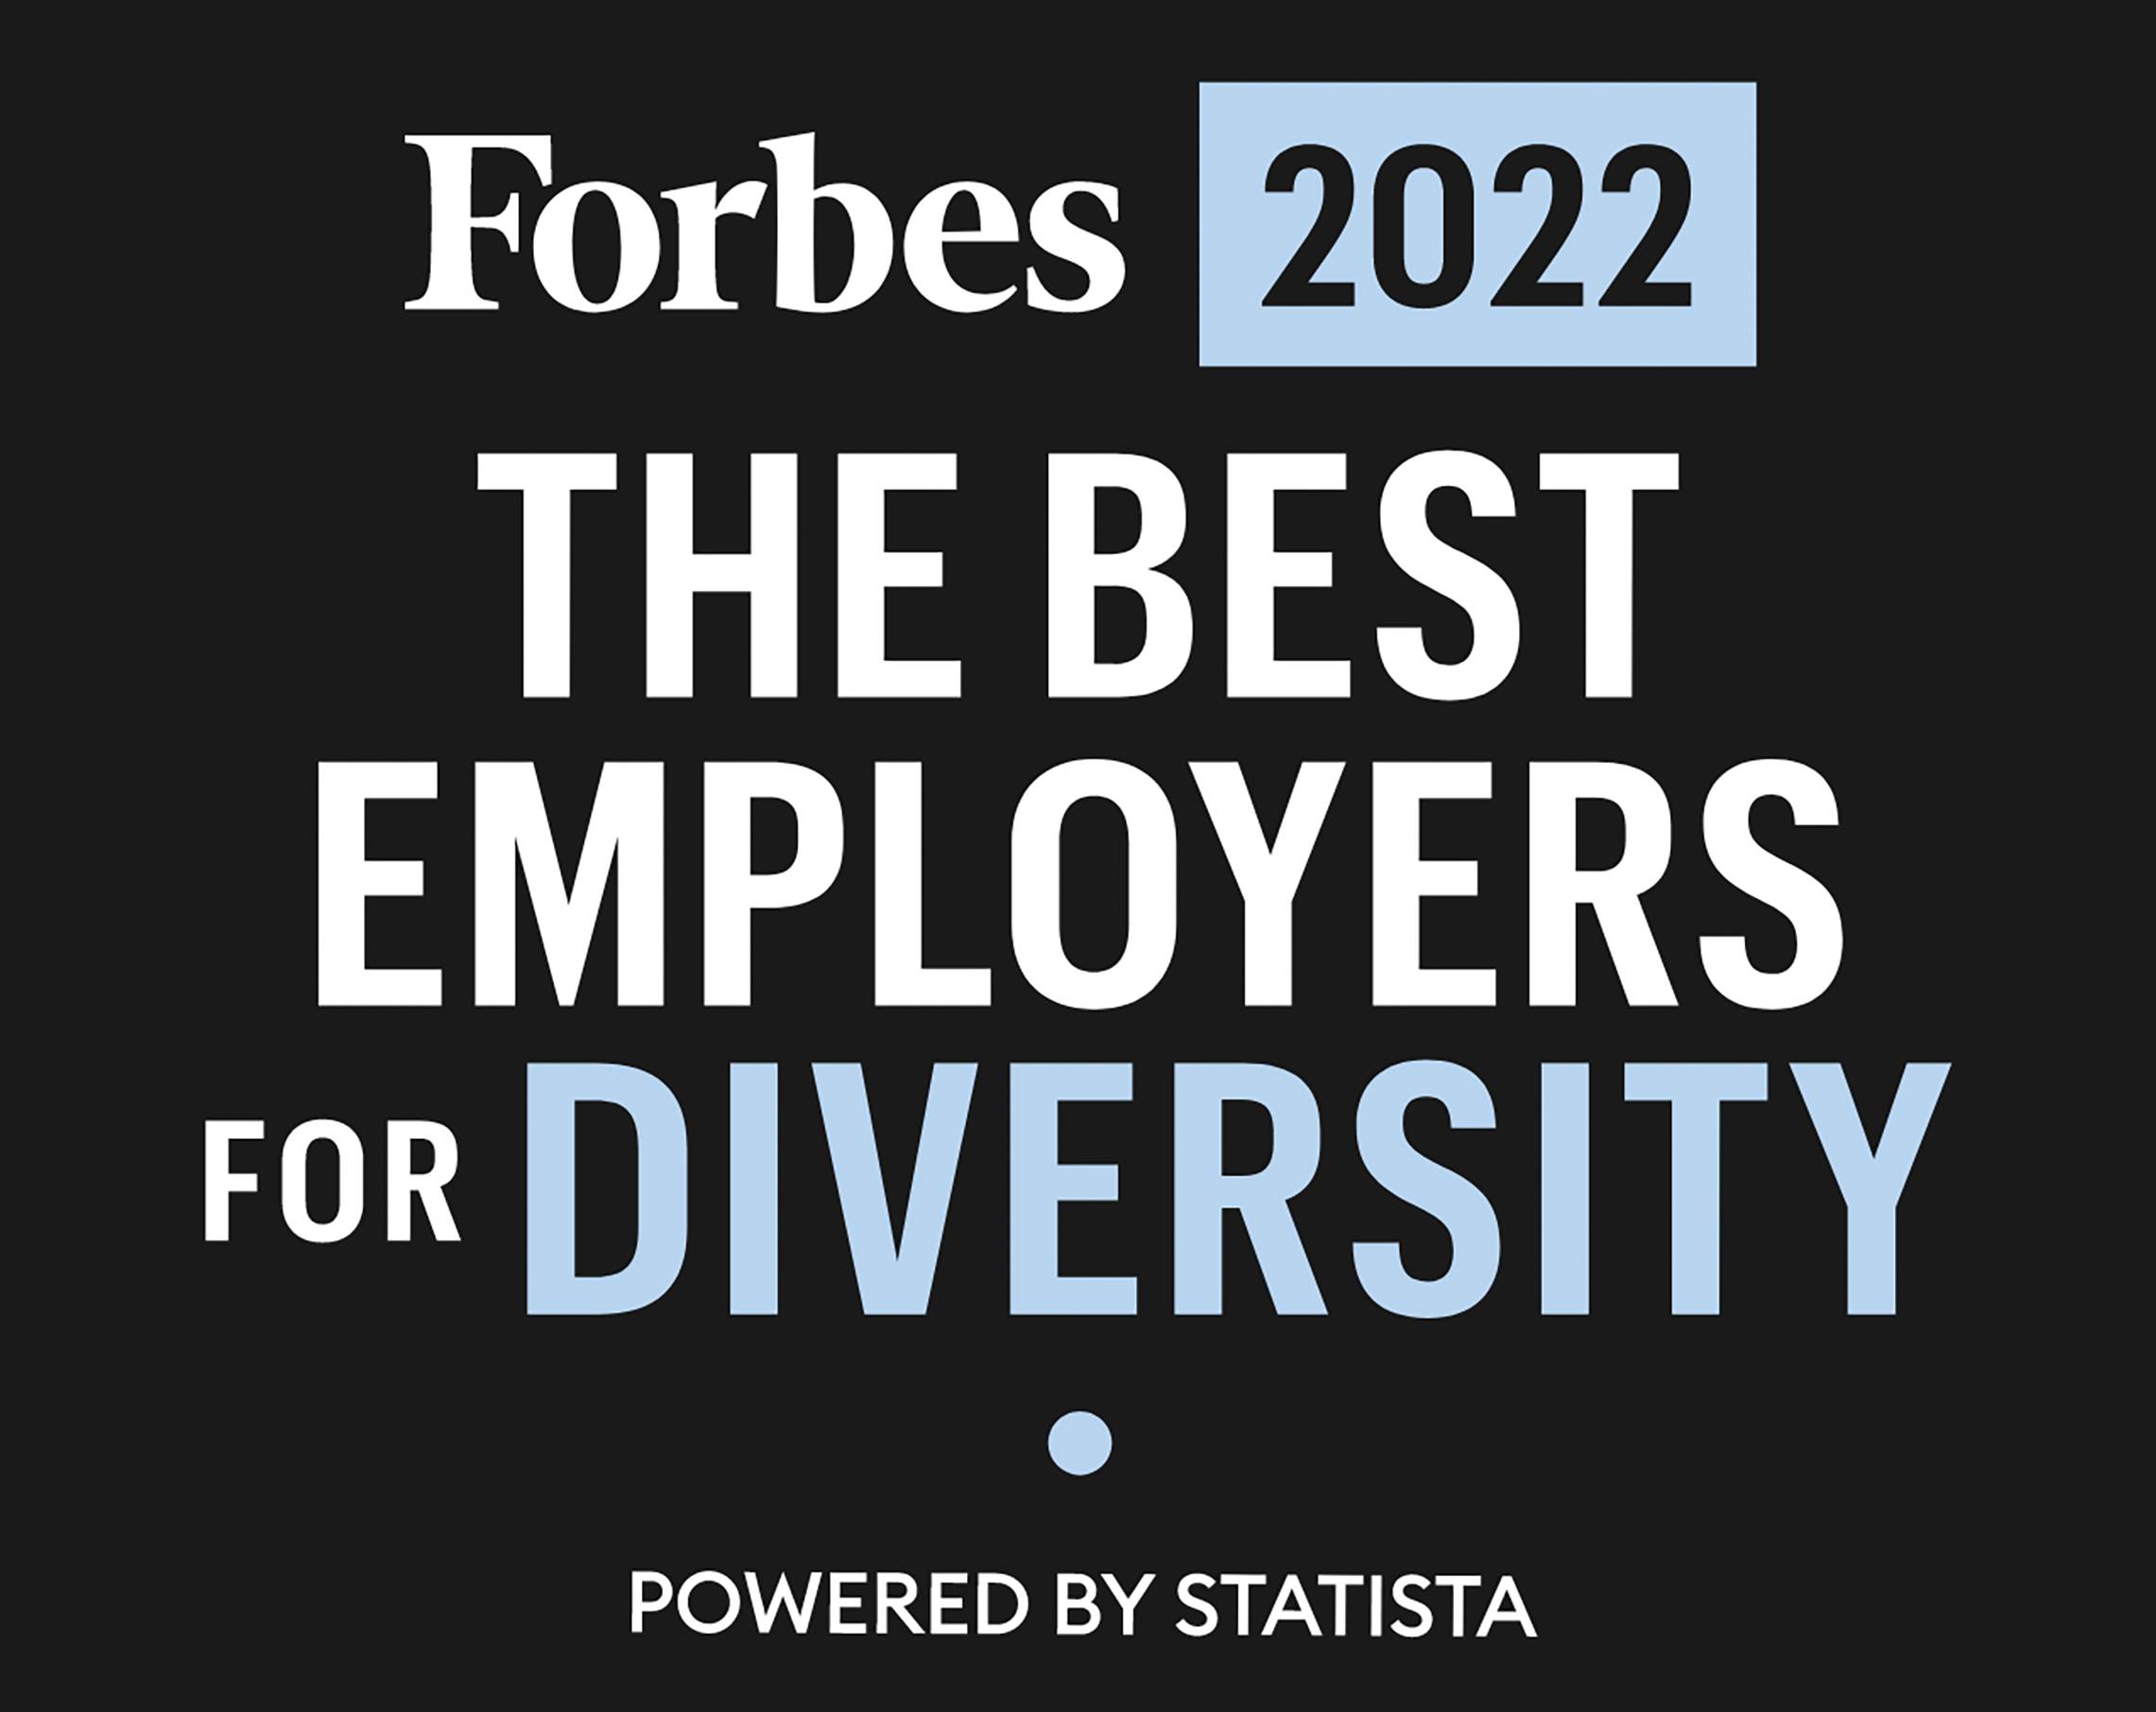 Forbes logo: 2022 The Best Employers for Diversity